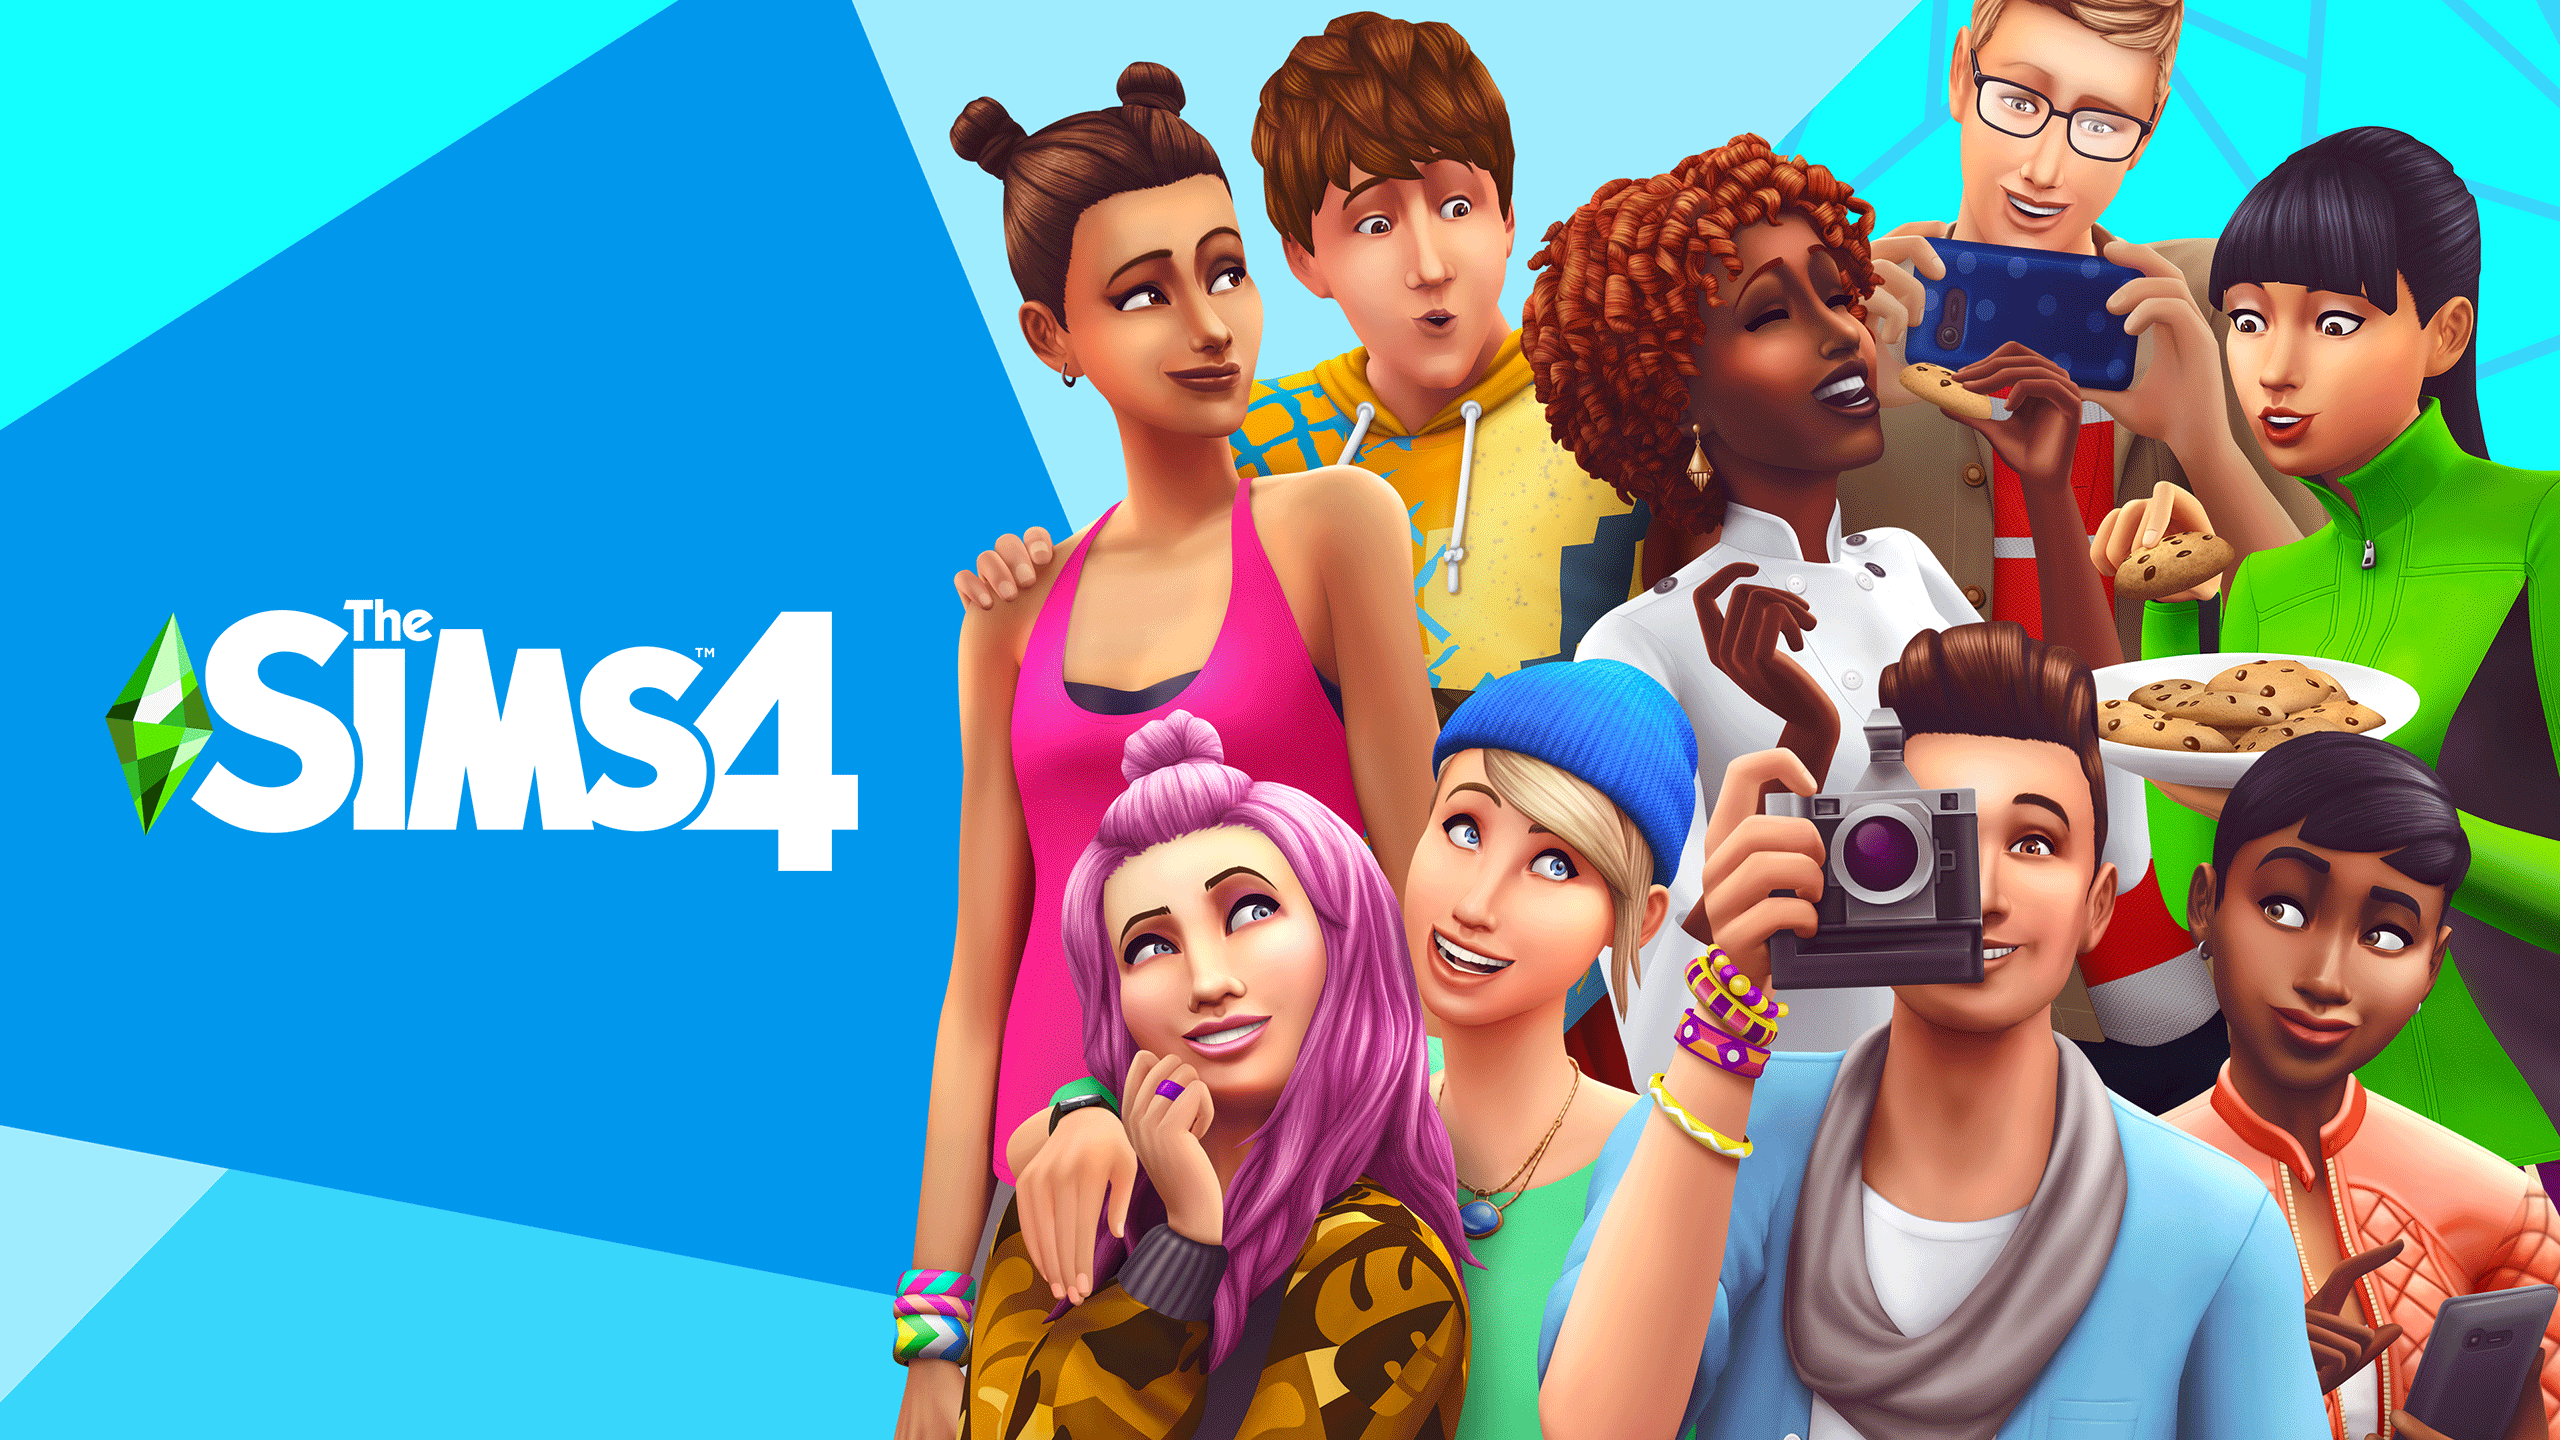 Sims 4 steam price фото 2